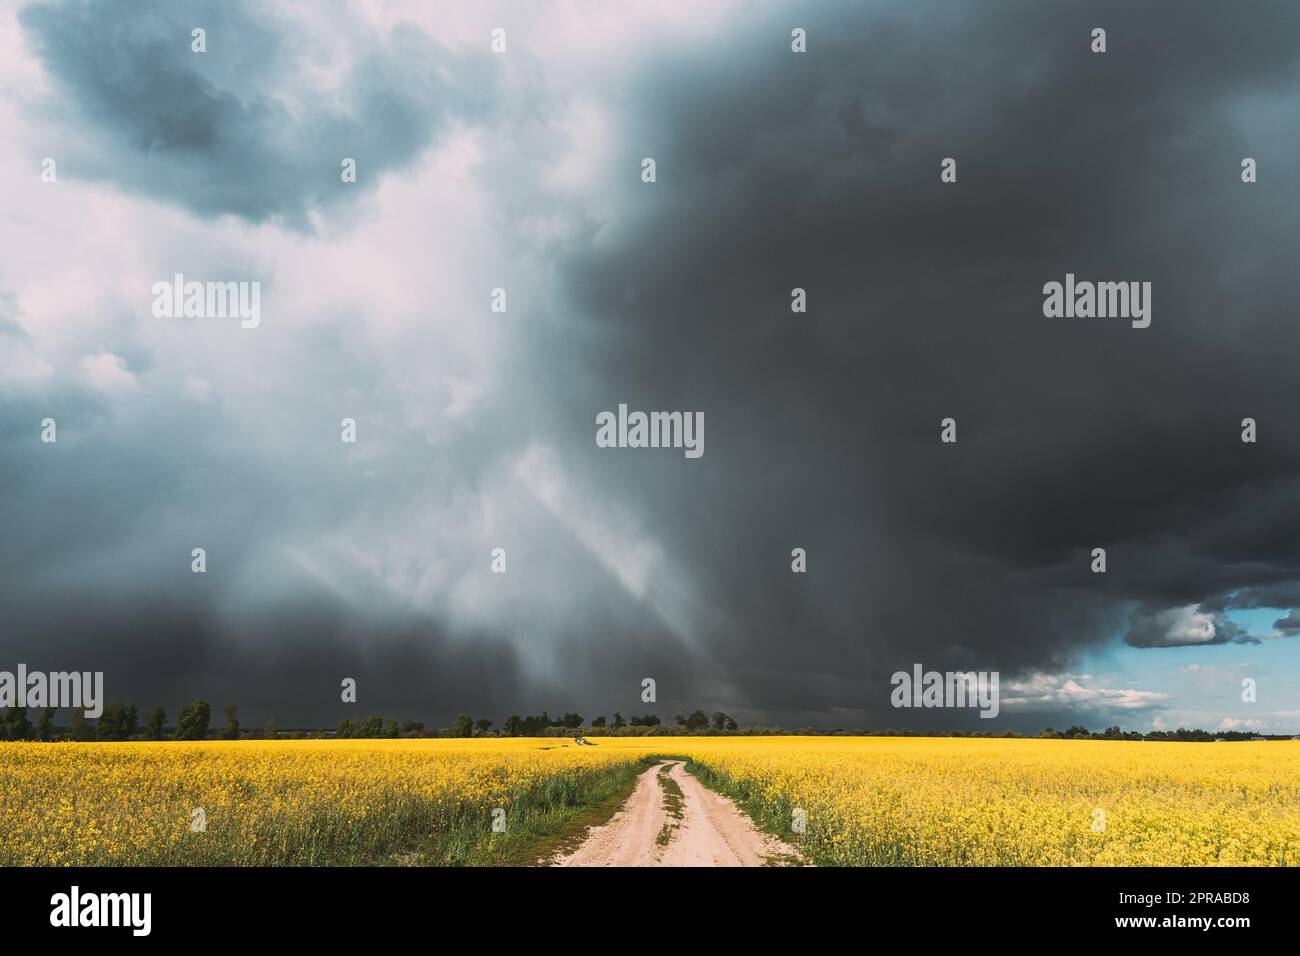 Dramatic Rain Sky With Rain Clouds And Sunrays On Horizon Above Rural Landscape Camola Colza Rapeseed Field. Country Road. Agricultural And Weather Forecast Concept Stock Photo